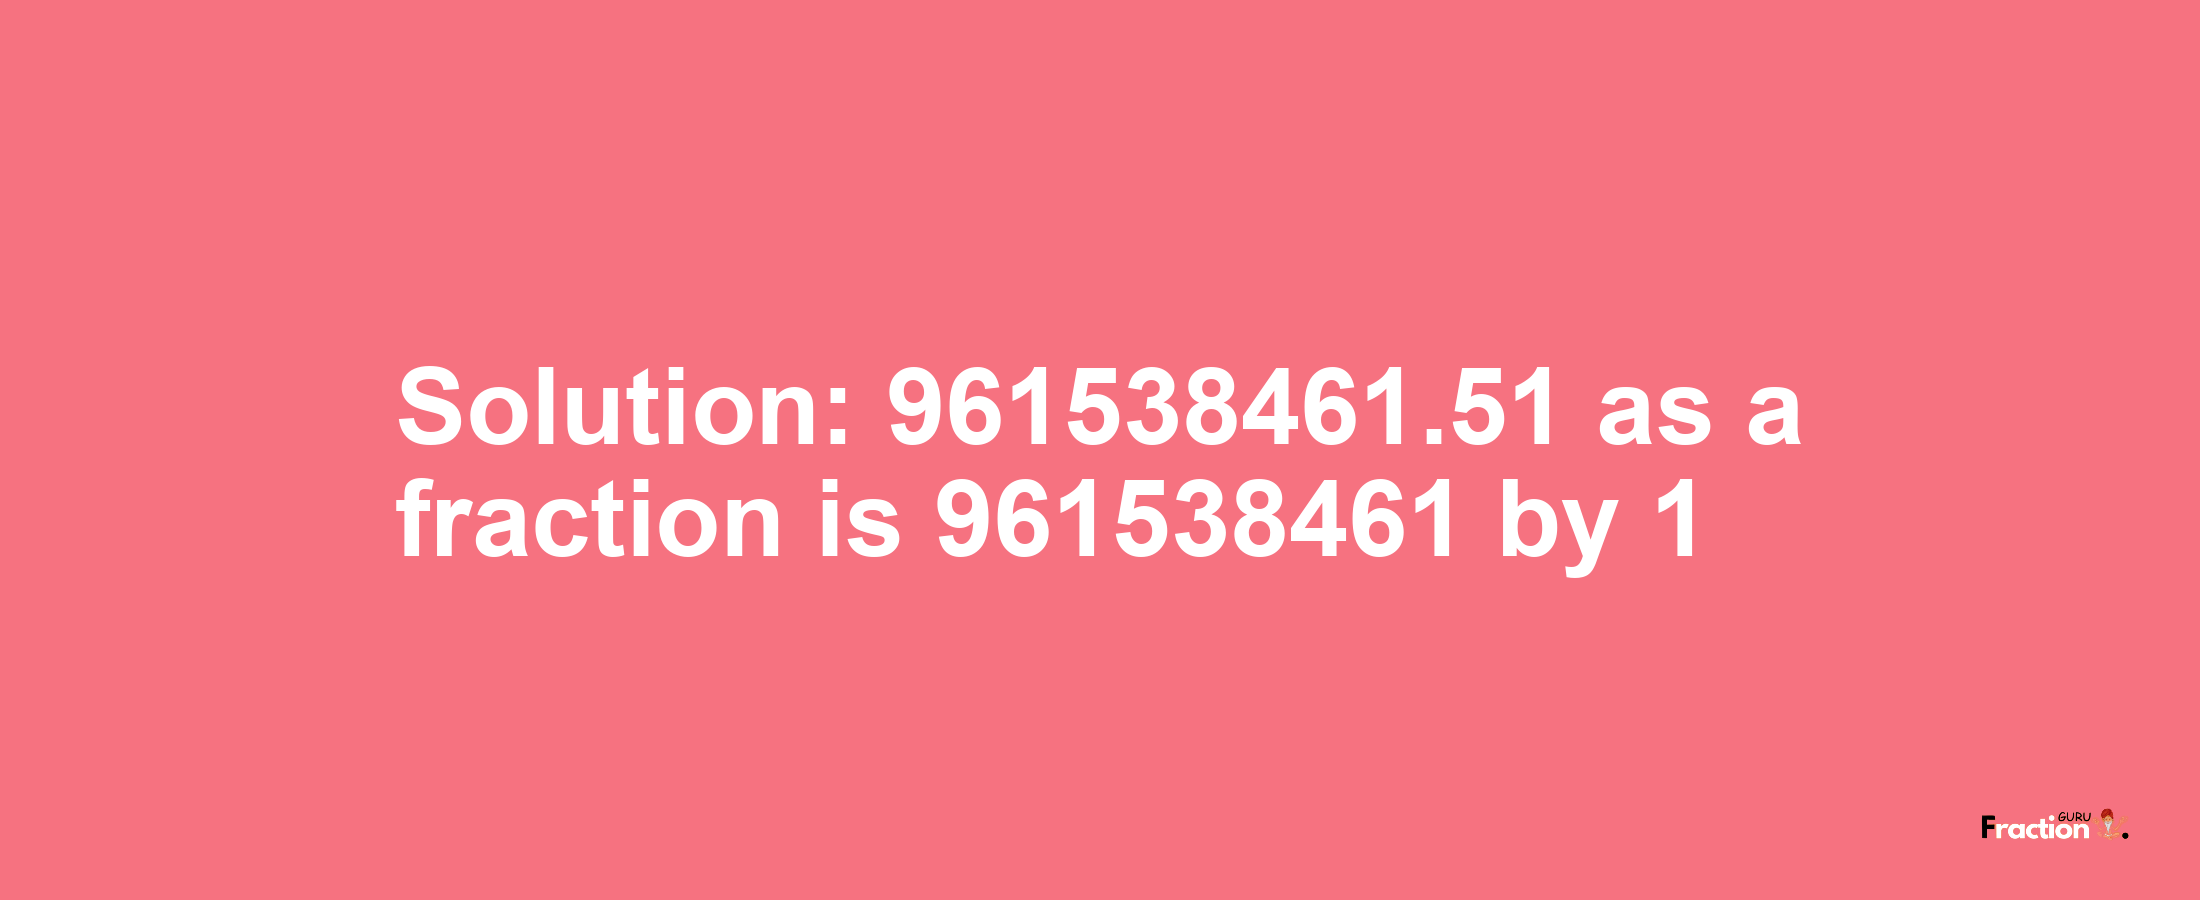 Solution:961538461.51 as a fraction is 961538461/1